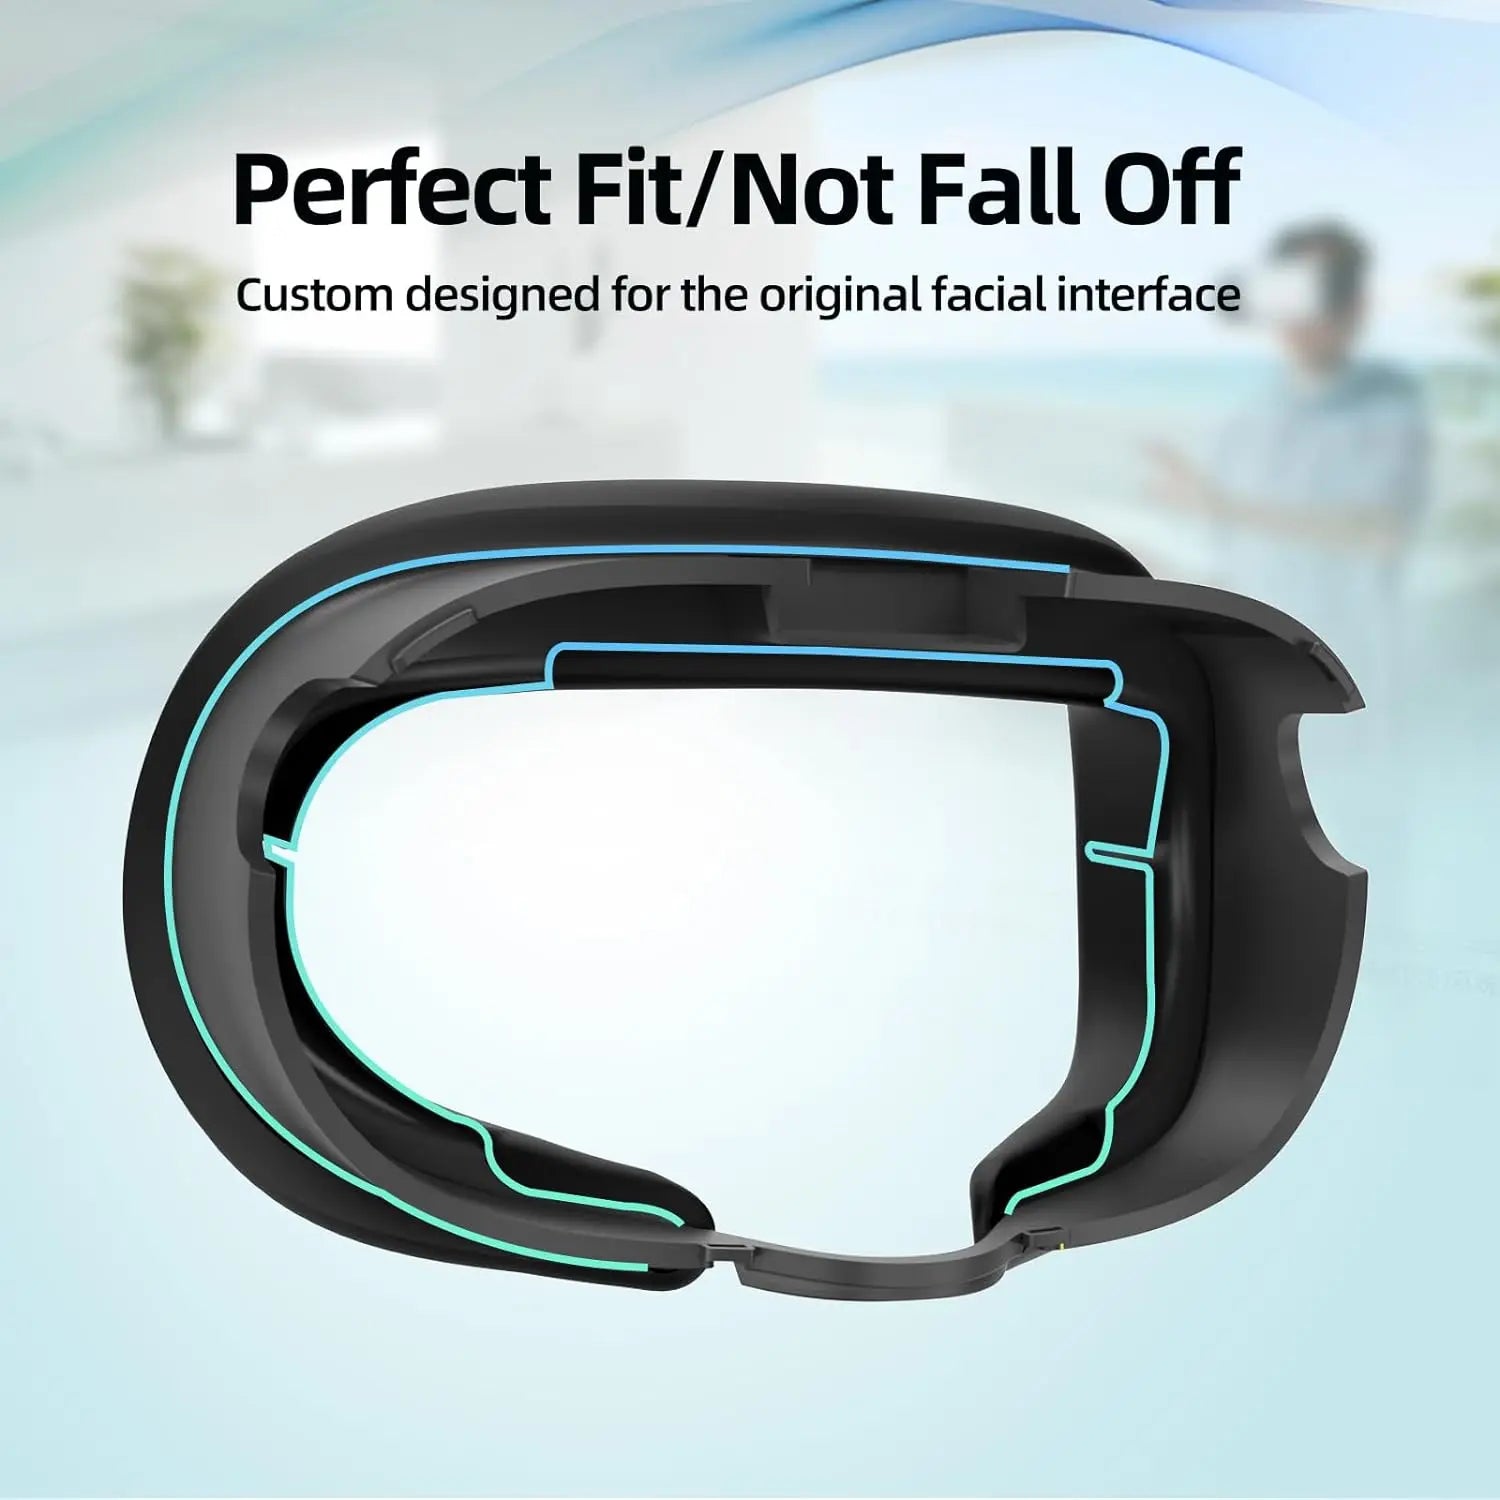 Should You Buy The AMVR Quest 3 Facial Interface? 